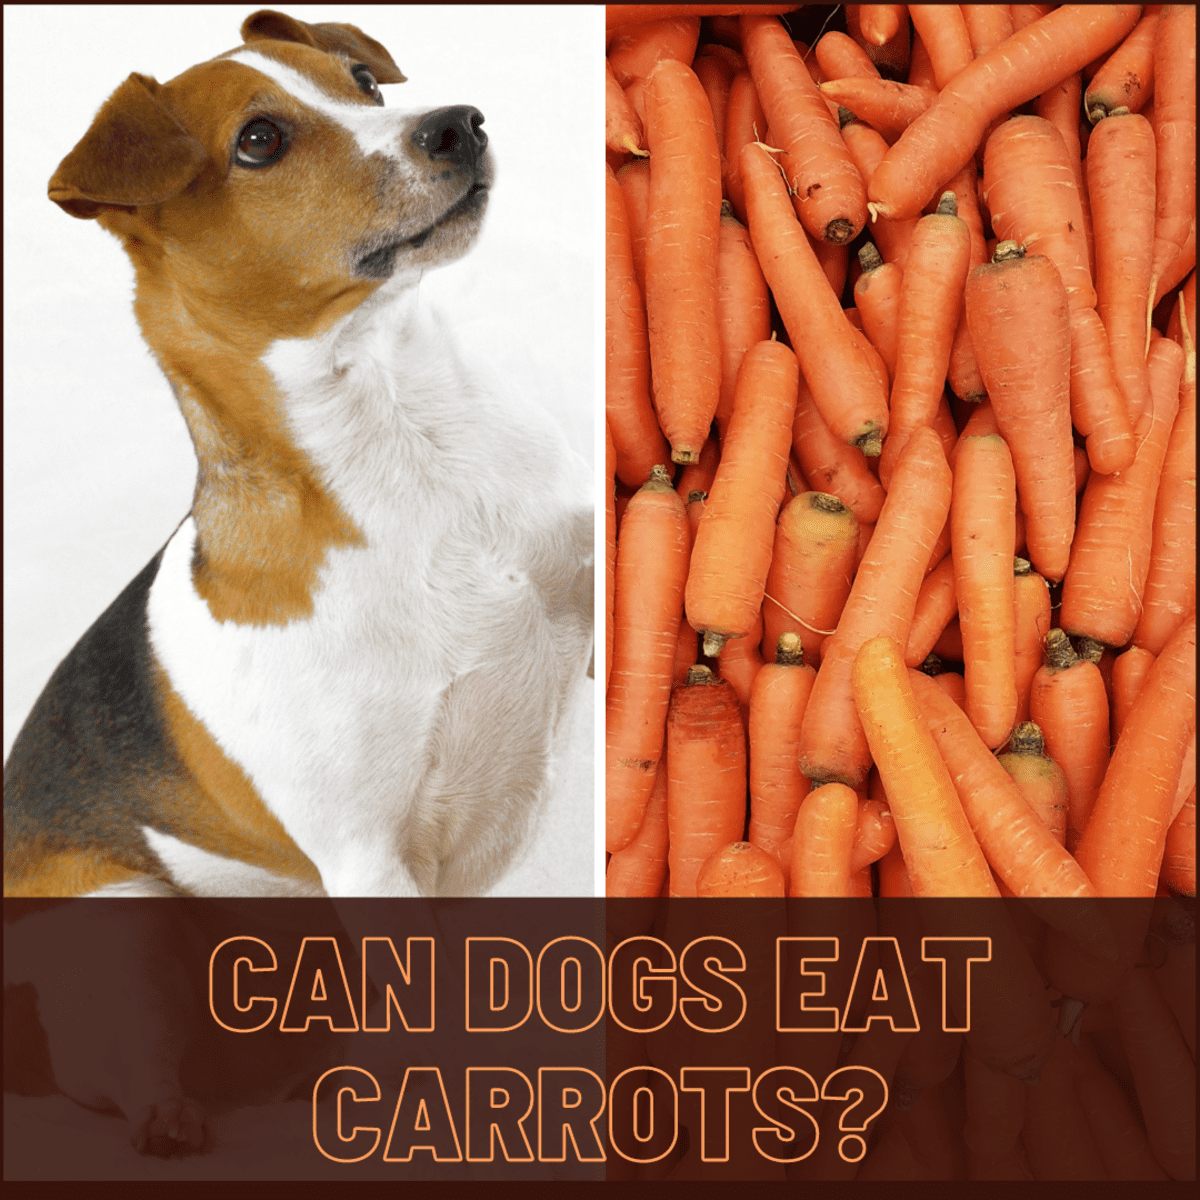 Are Carrots Good for Dogs? - PetHelpful